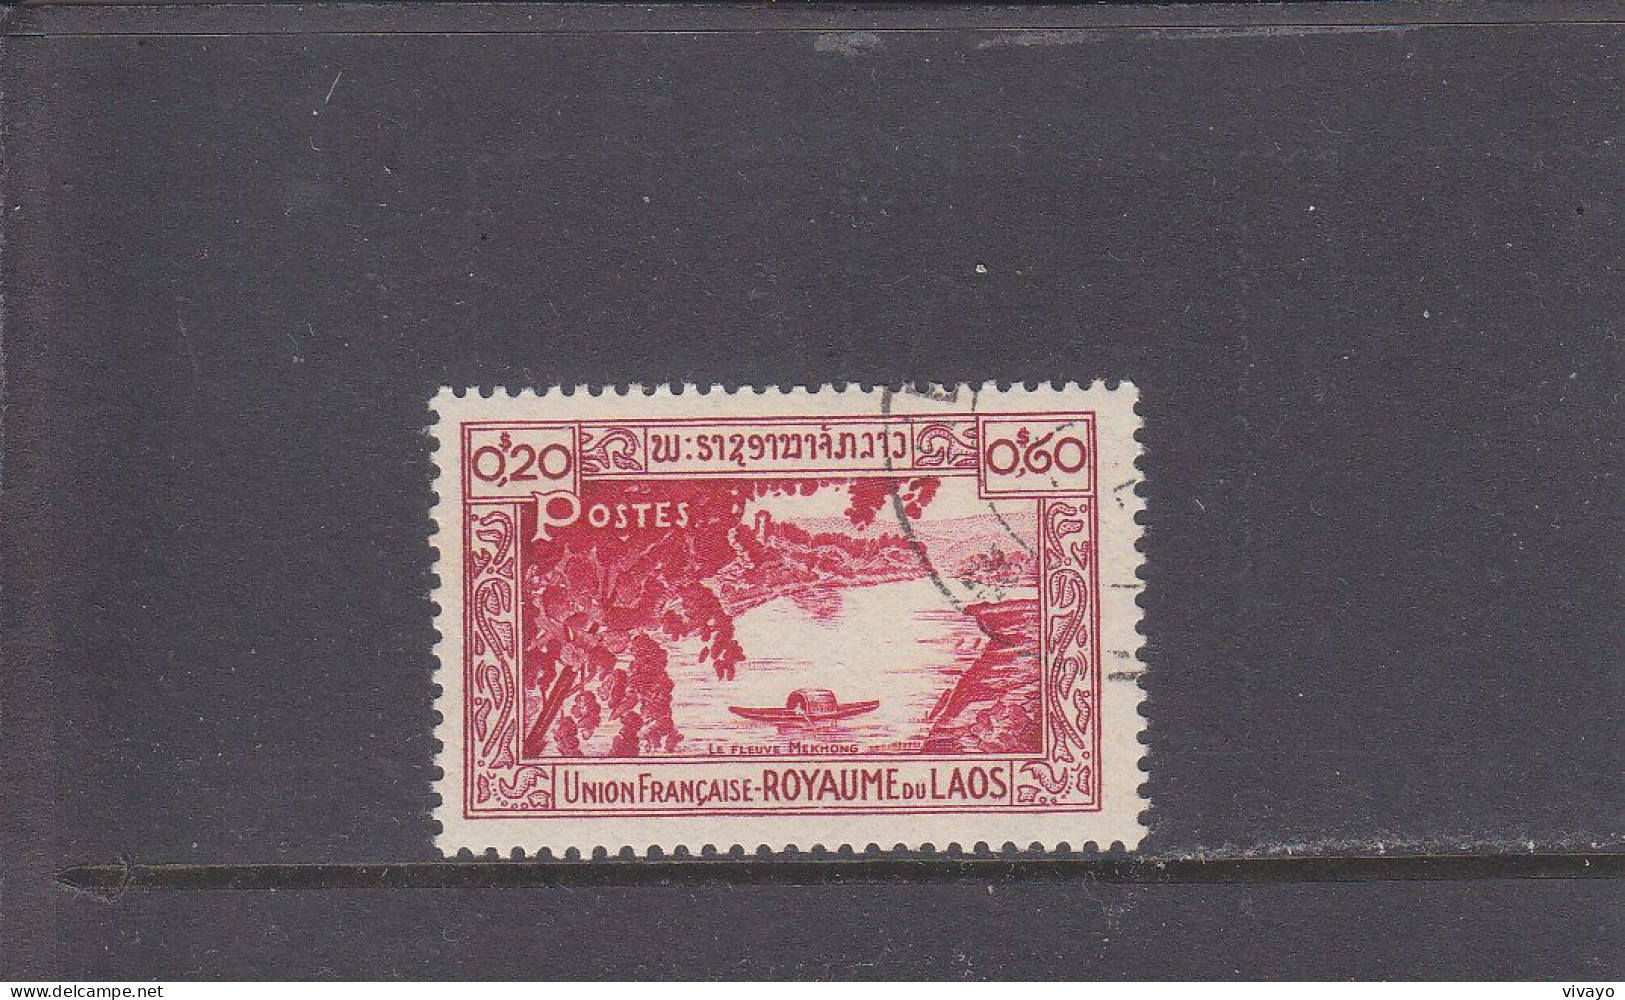 LAOS - O / FINE CANCELLED - 1951 - LOCAL BOAT ON THE MEKONG - Yv. 5    Mi. 2 - Laos